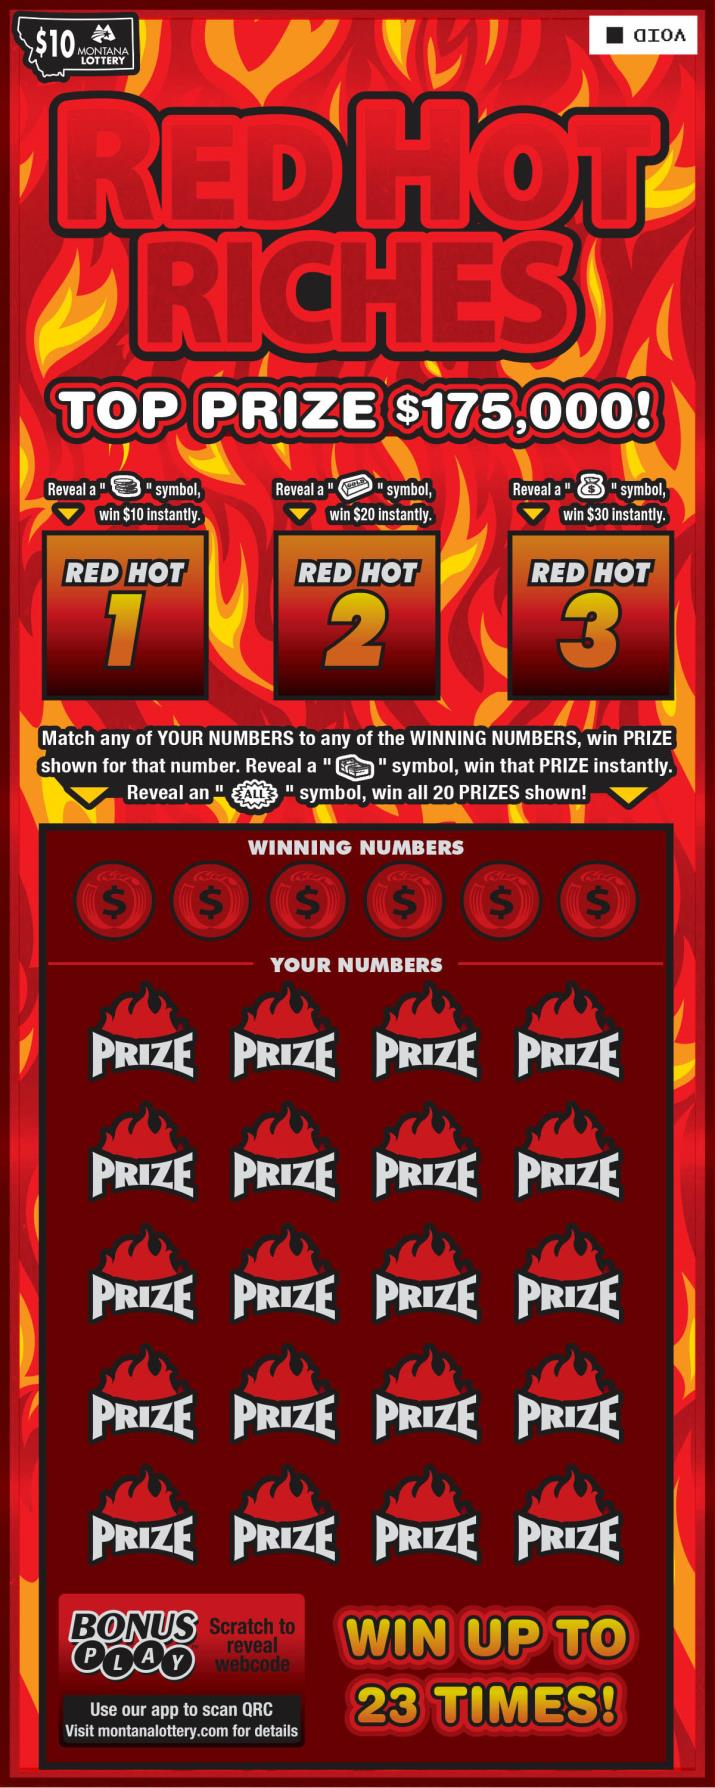 Red Hot Riches